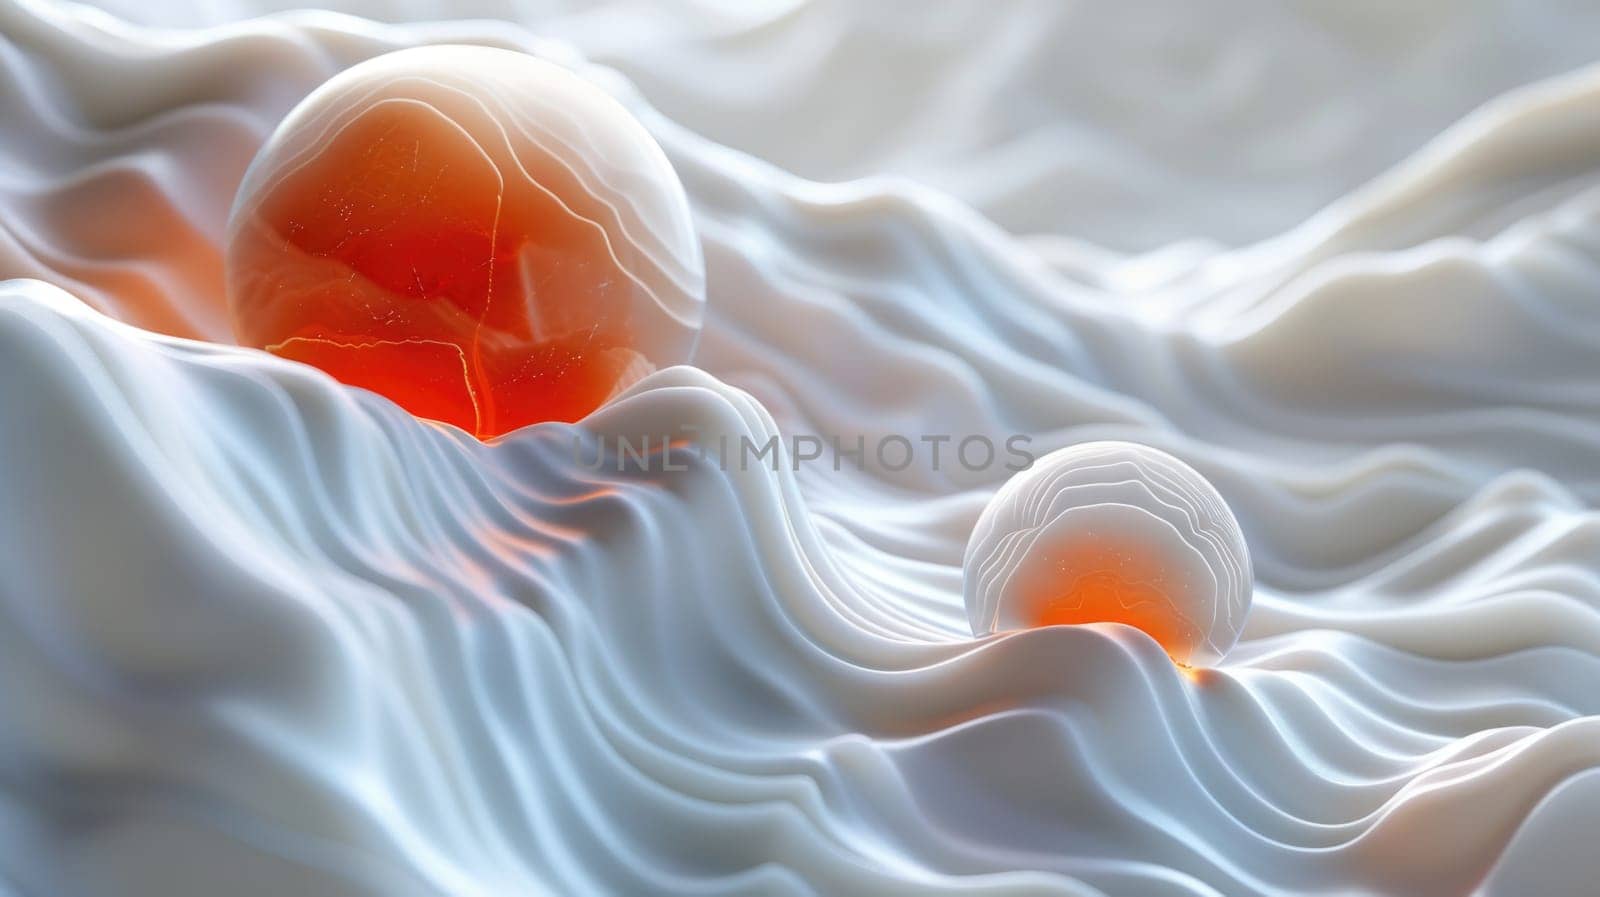 A computer generated image depicting an orange ball floating in the water.